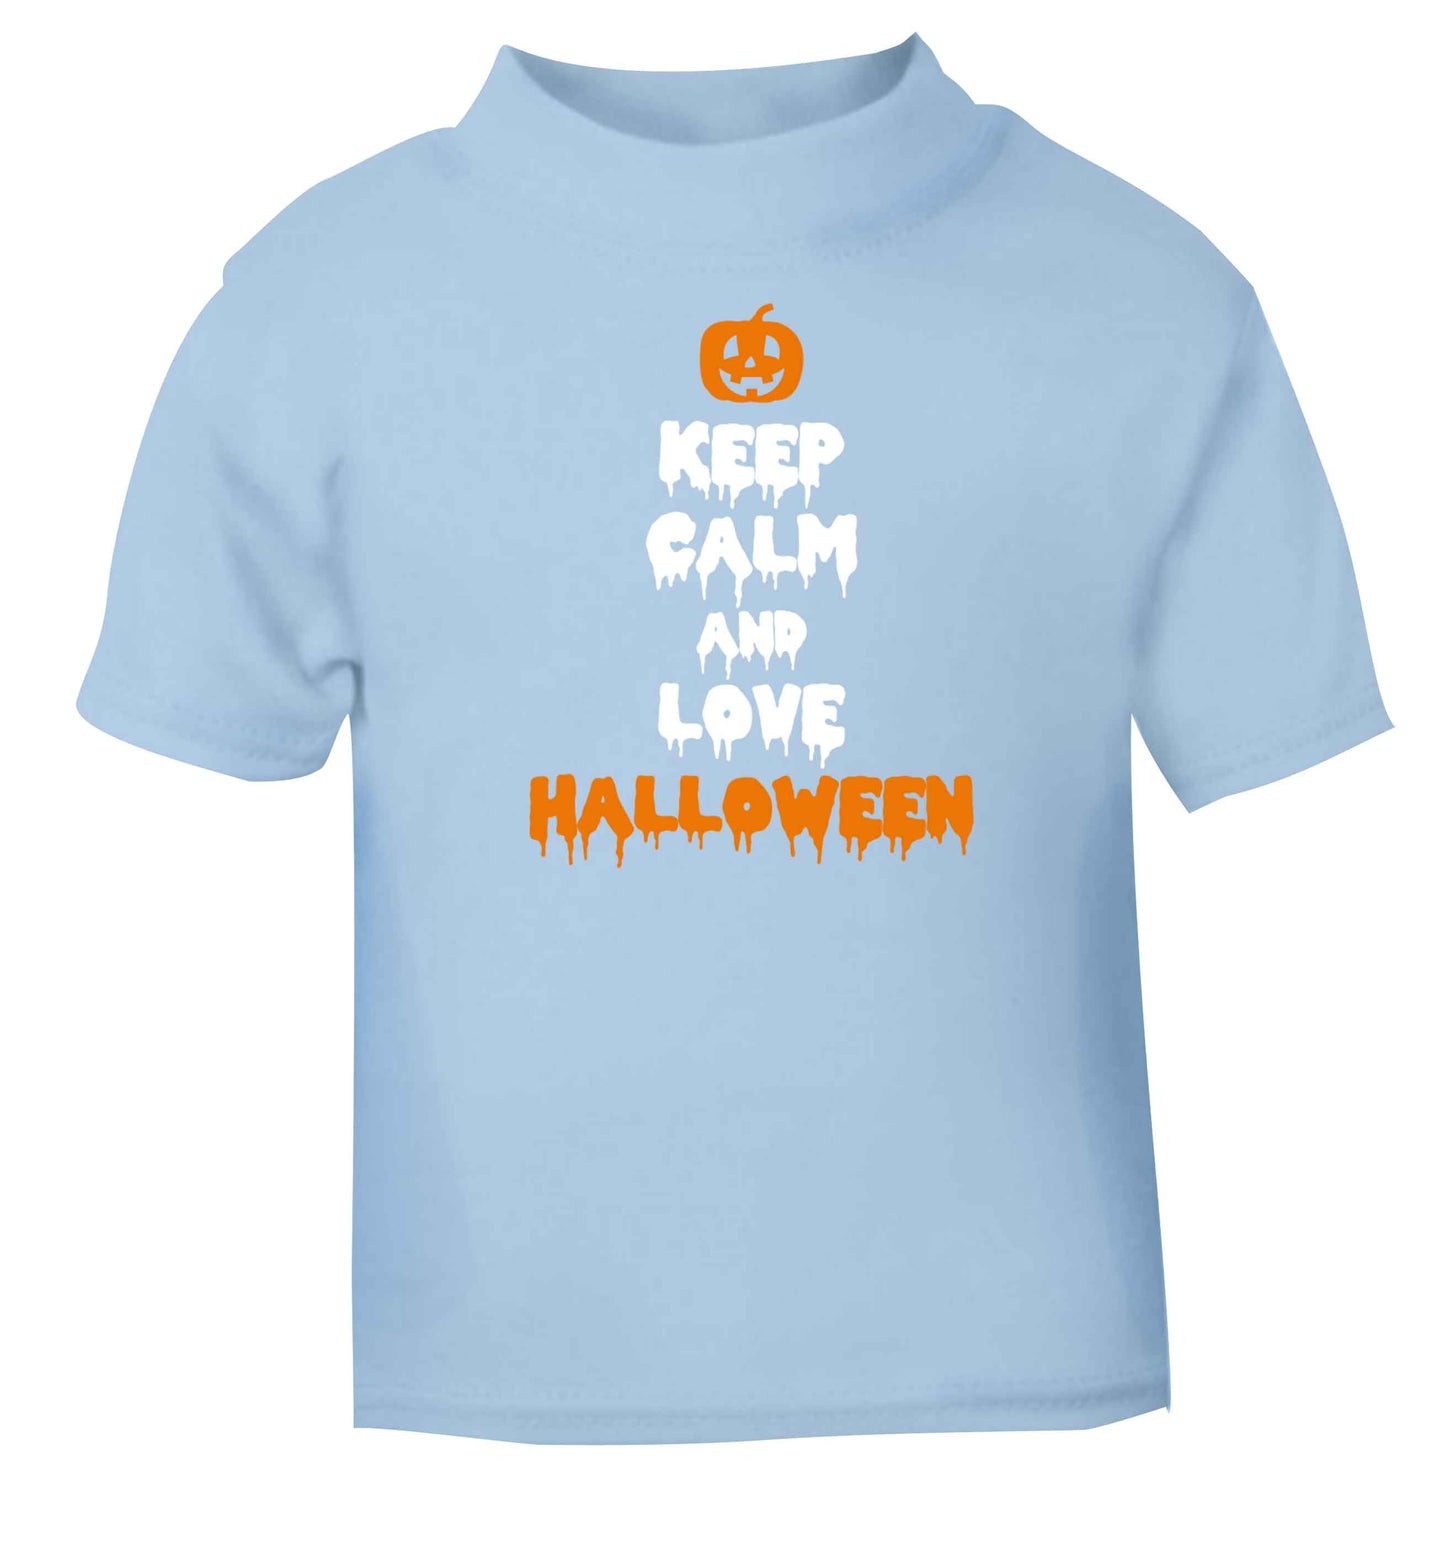 Keep calm and love halloween light blue baby toddler Tshirt 2 Years